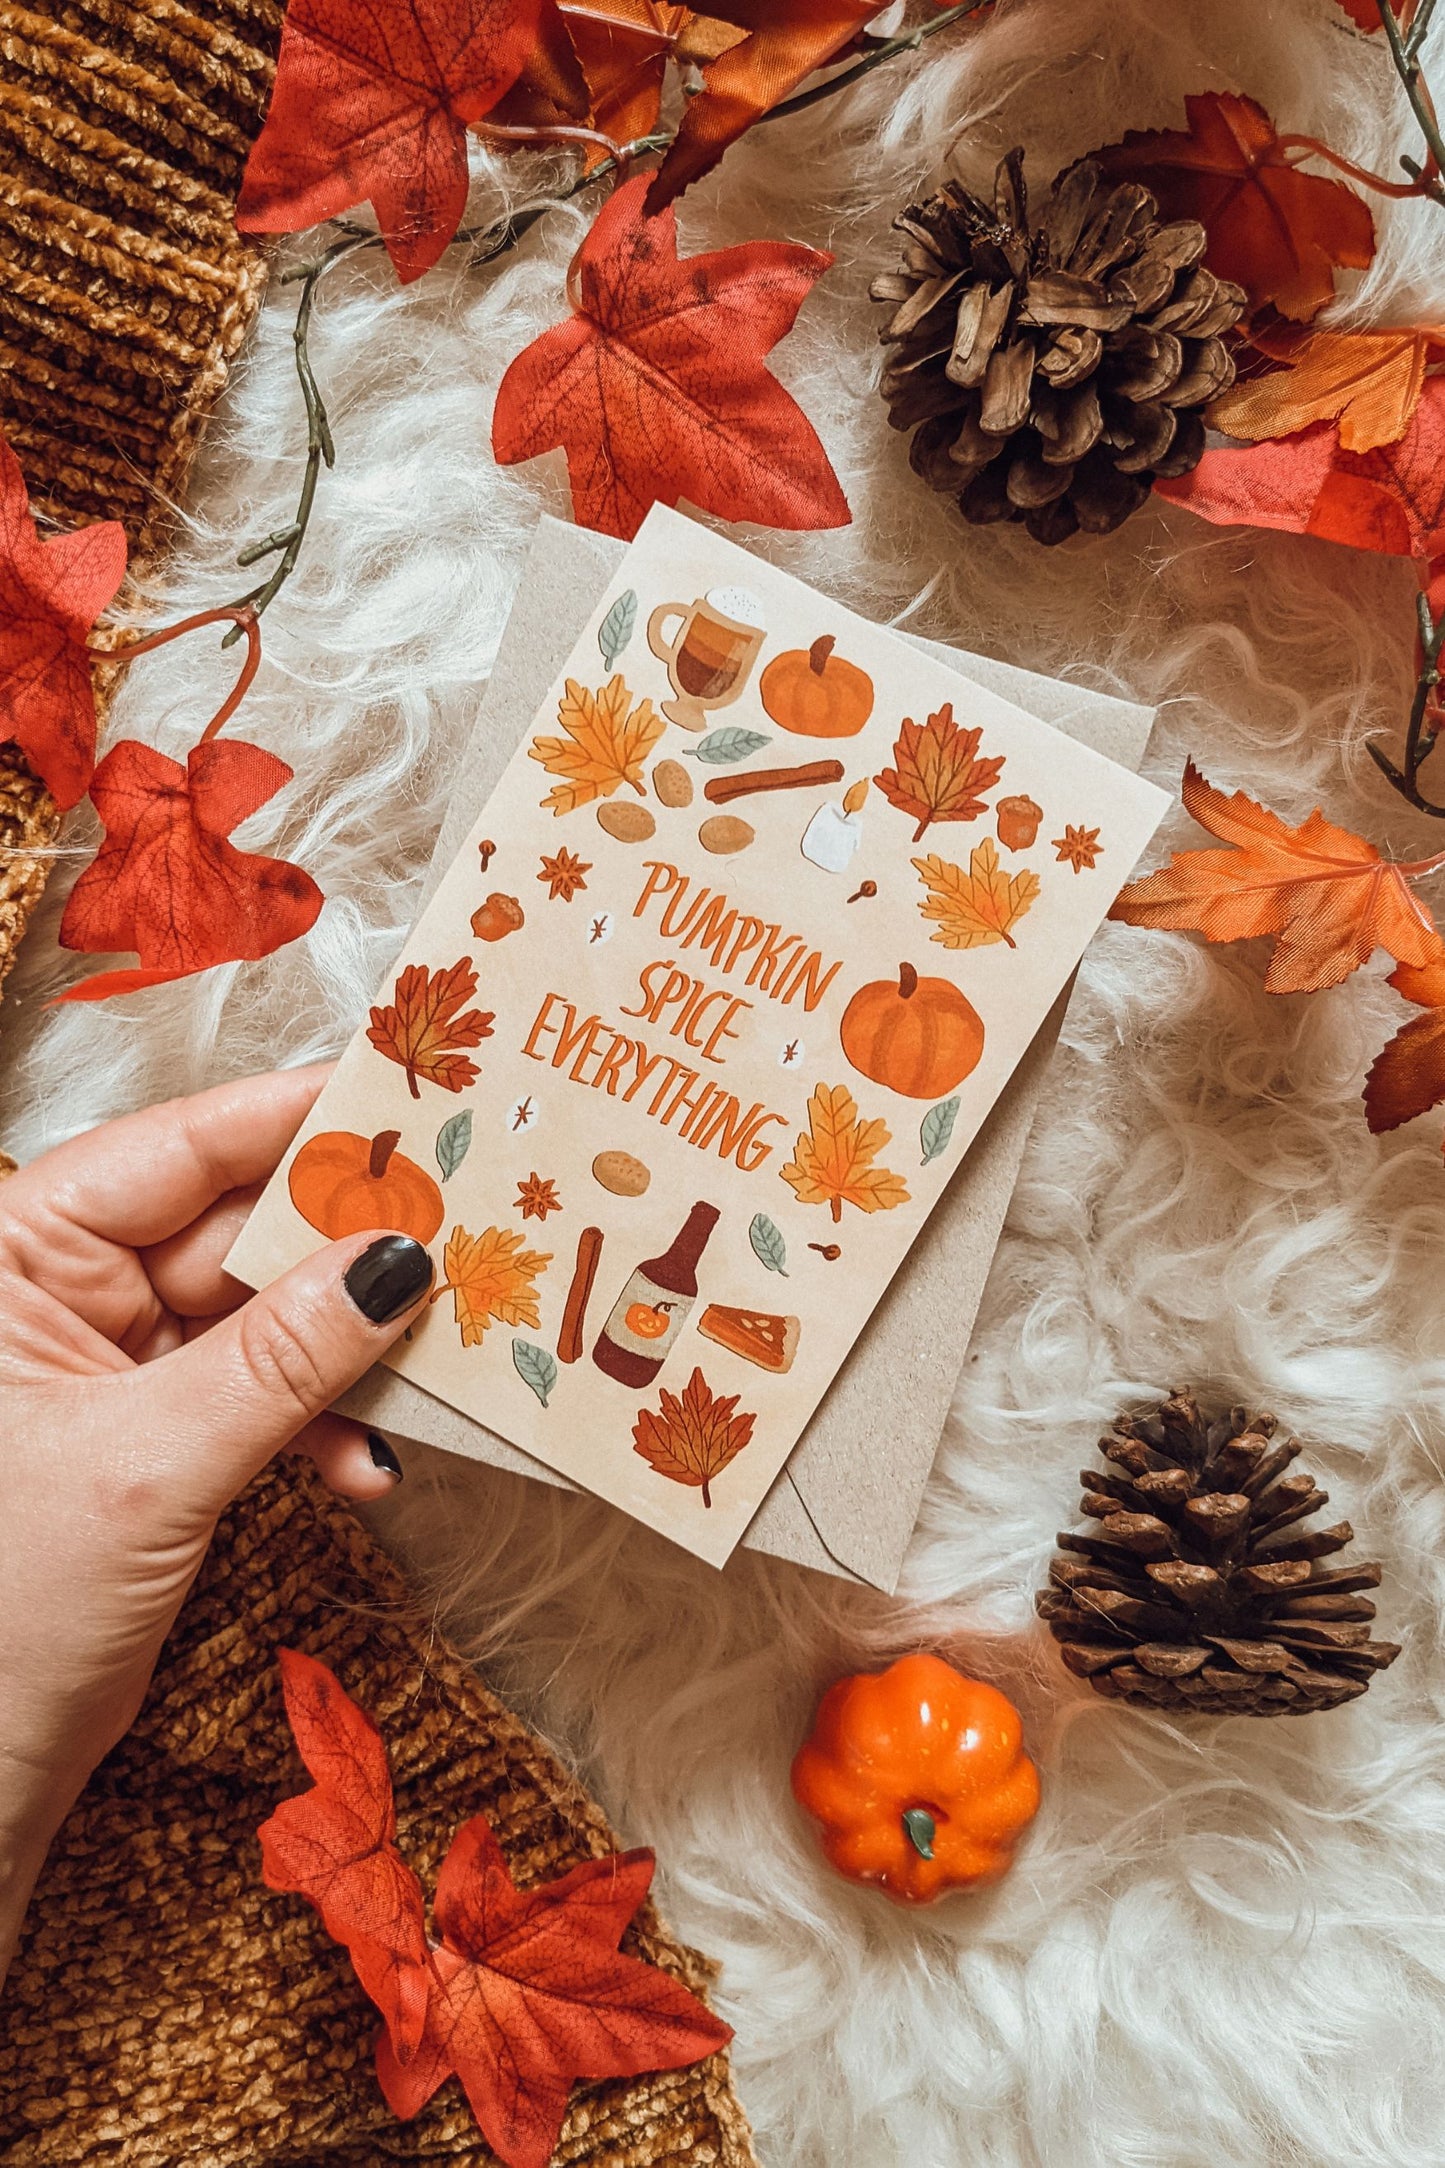 'Pumpkin Spice Everything' Greeting Card